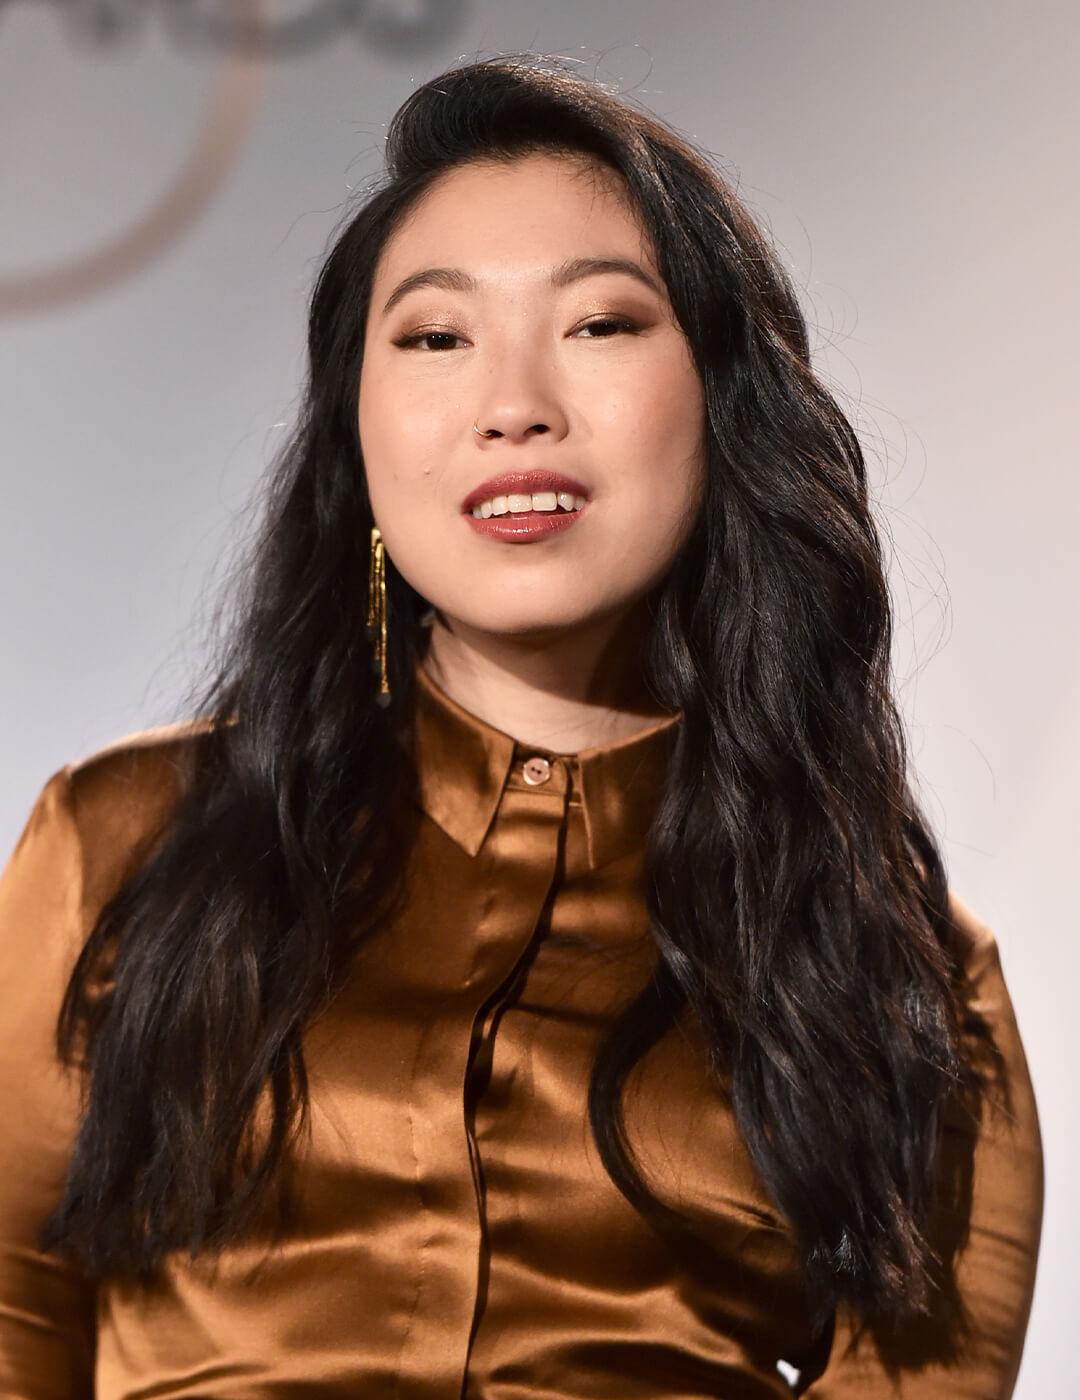 Awkwafina posing in a copper dress and beach waves hairstyle